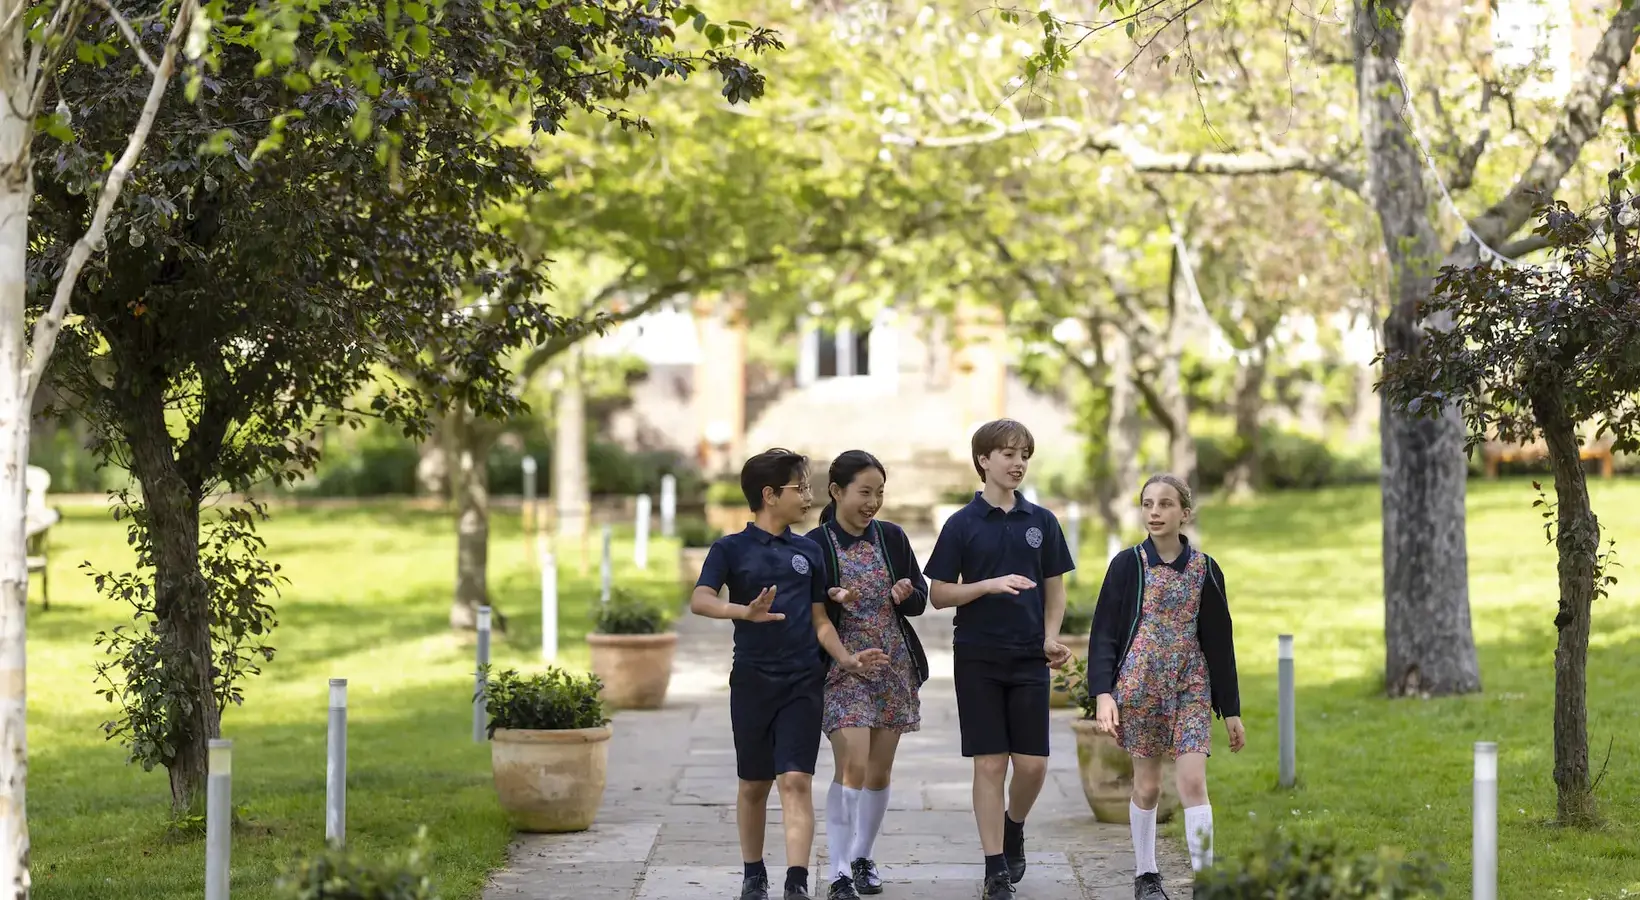 Prep School pupils walking in the grounds at Ibstock Place School, a private school near Richmond, Barnes, Putney, Kingston, & Wandsworth